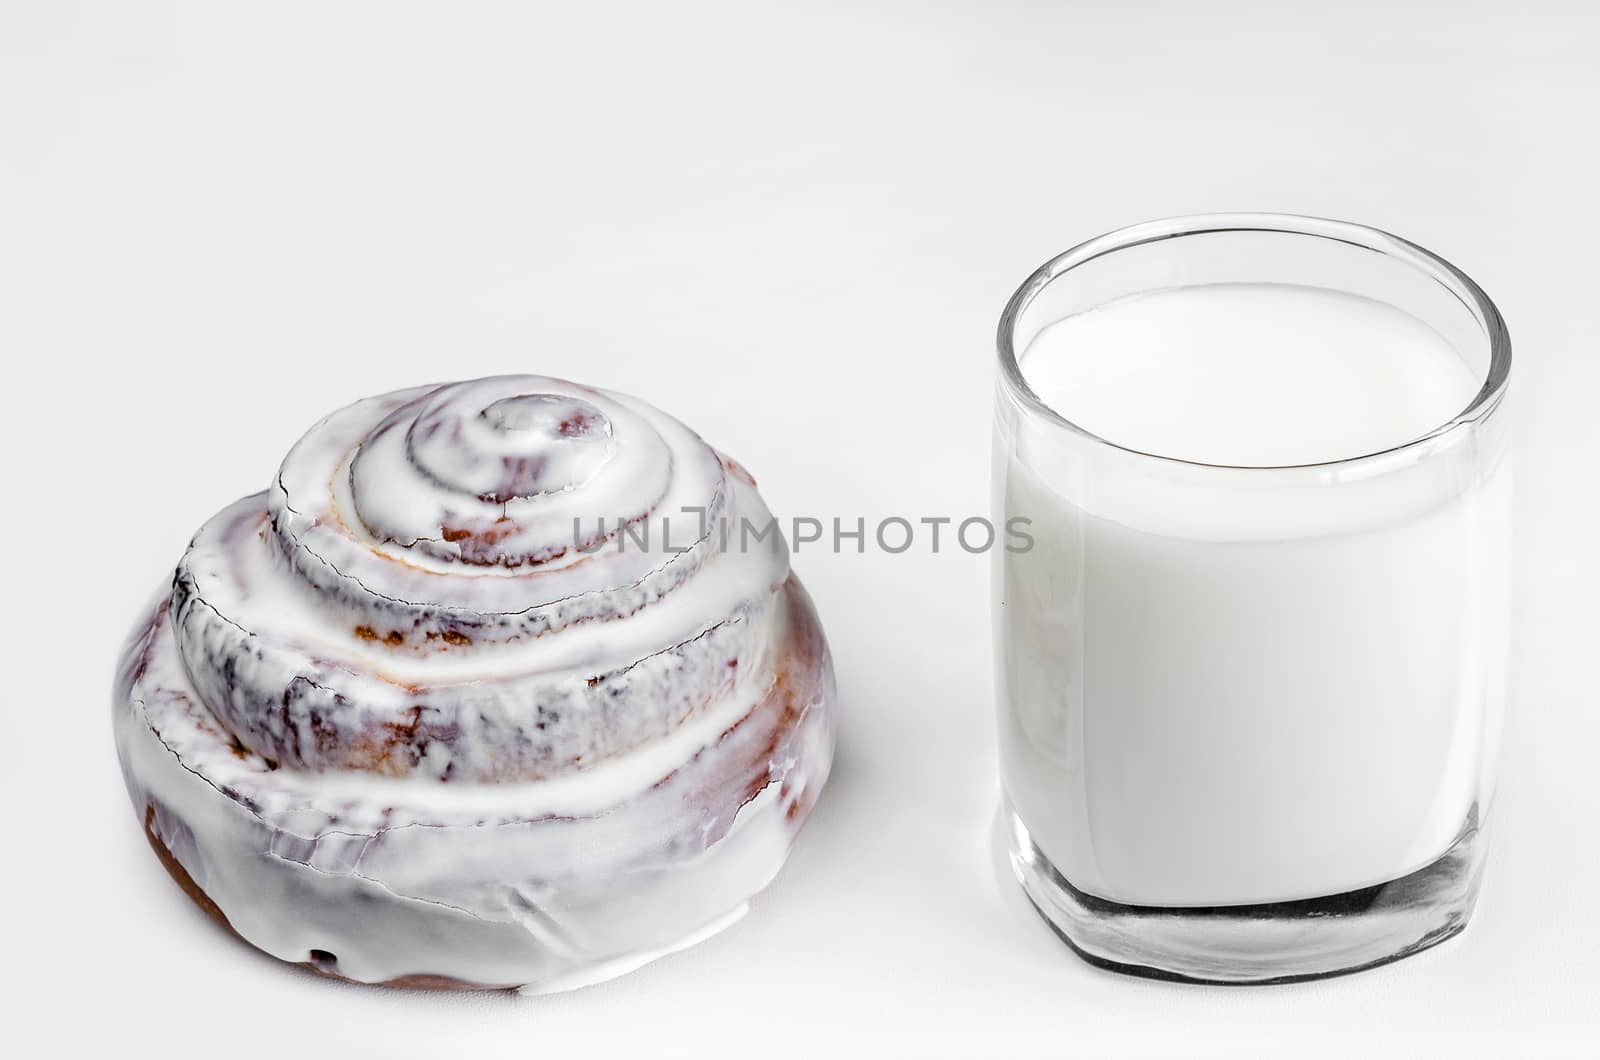 Bun with icing and a glass of milk by Gaina